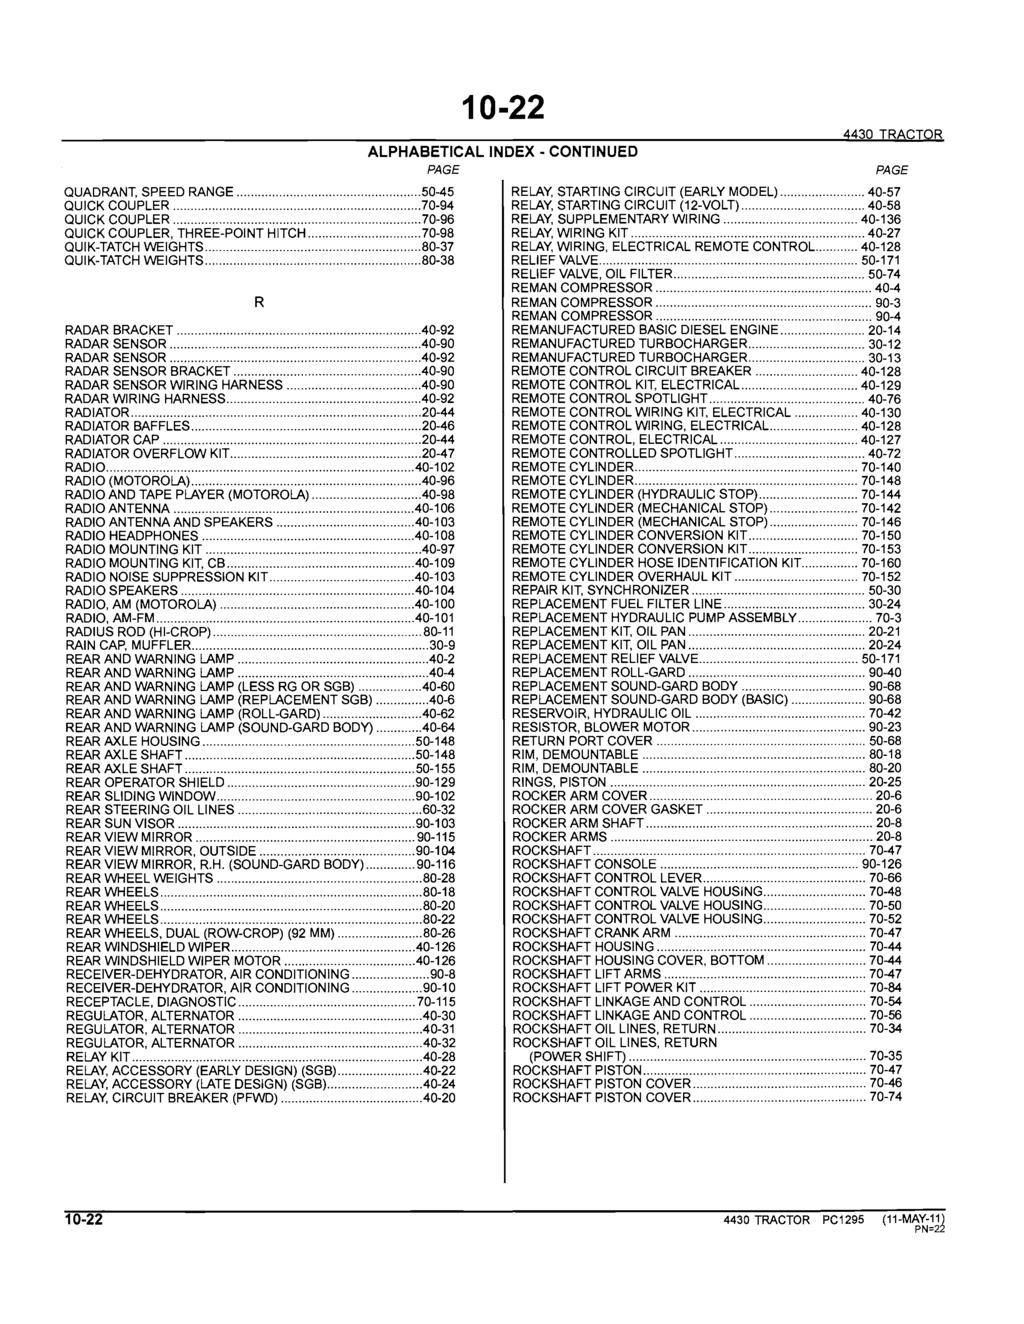 10-22 ALPHABETICAL INDEX - CONTINUED PAGE 4430 TRACTOR QUADRANT, SPEED RANGE... 50-45 RELAY, STARTING CIRCUIT (EARLY MODEL)... 40-57 QUICK COUPLER... 70-94 RELAY, STARTING CIRCUIT (12-VOLT).